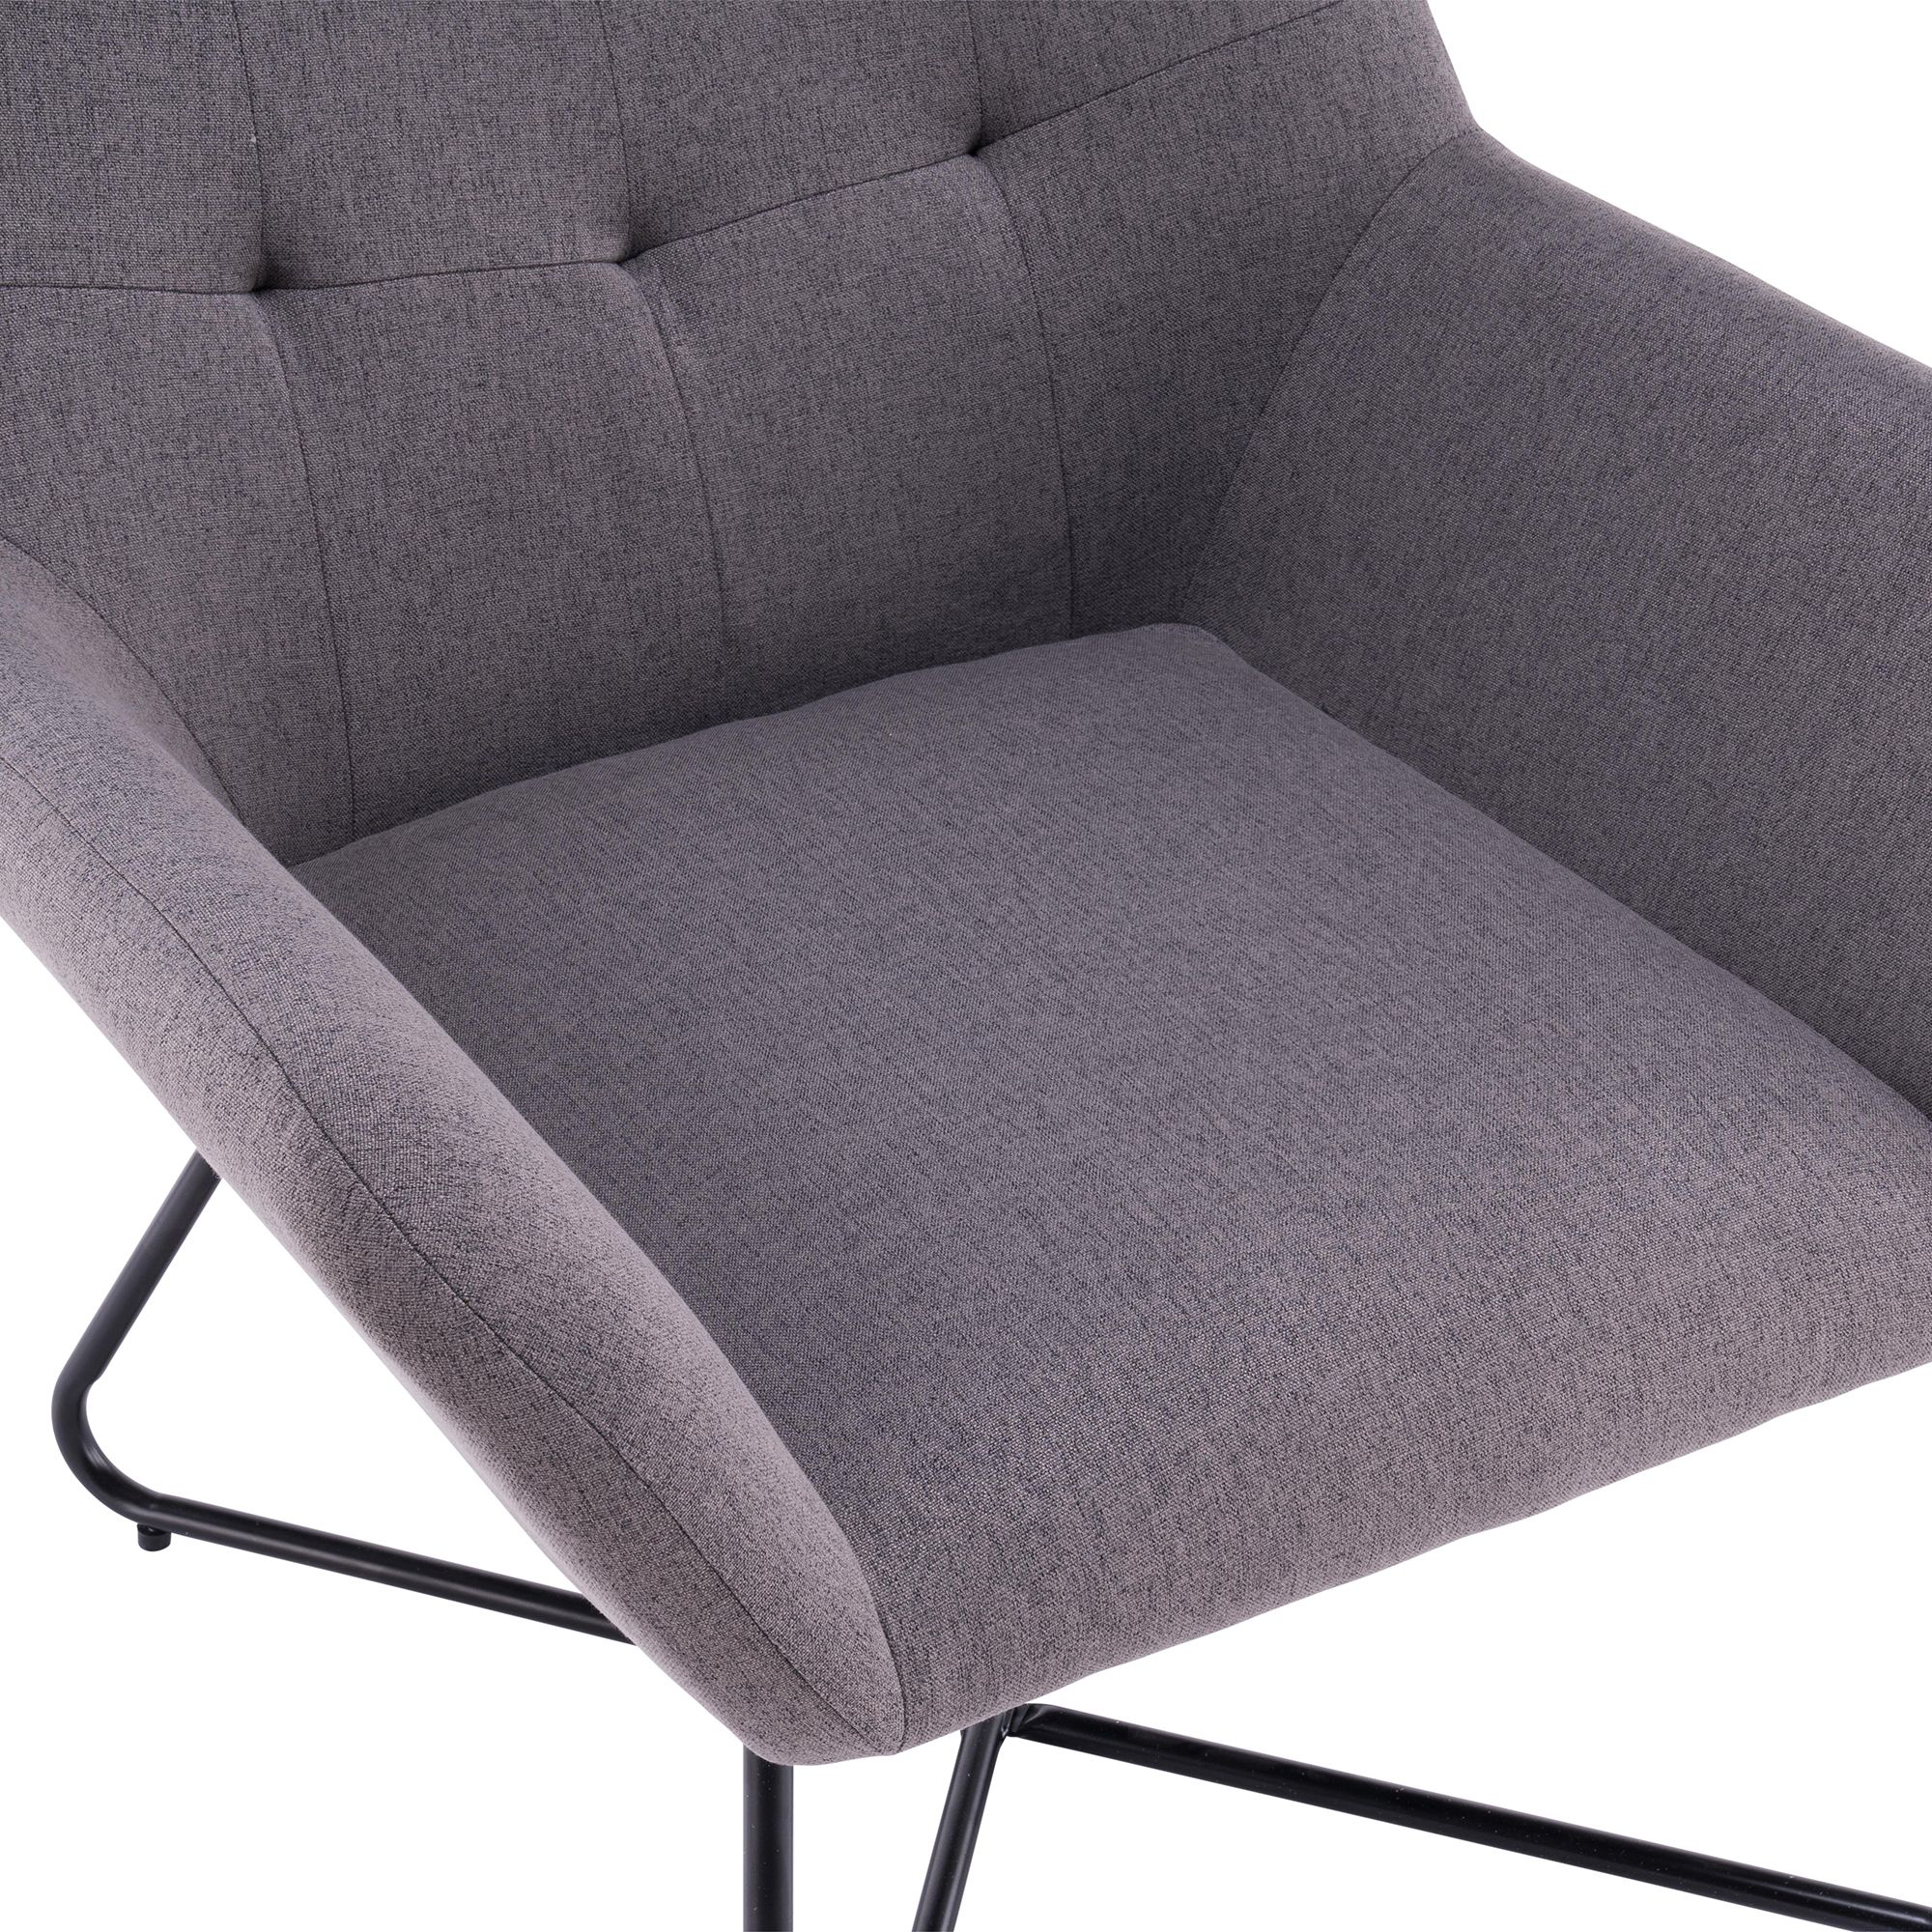 Turio Stone grey Linen effect Chair (H)865mm (W)750mm (D)800mm | Tradepoint